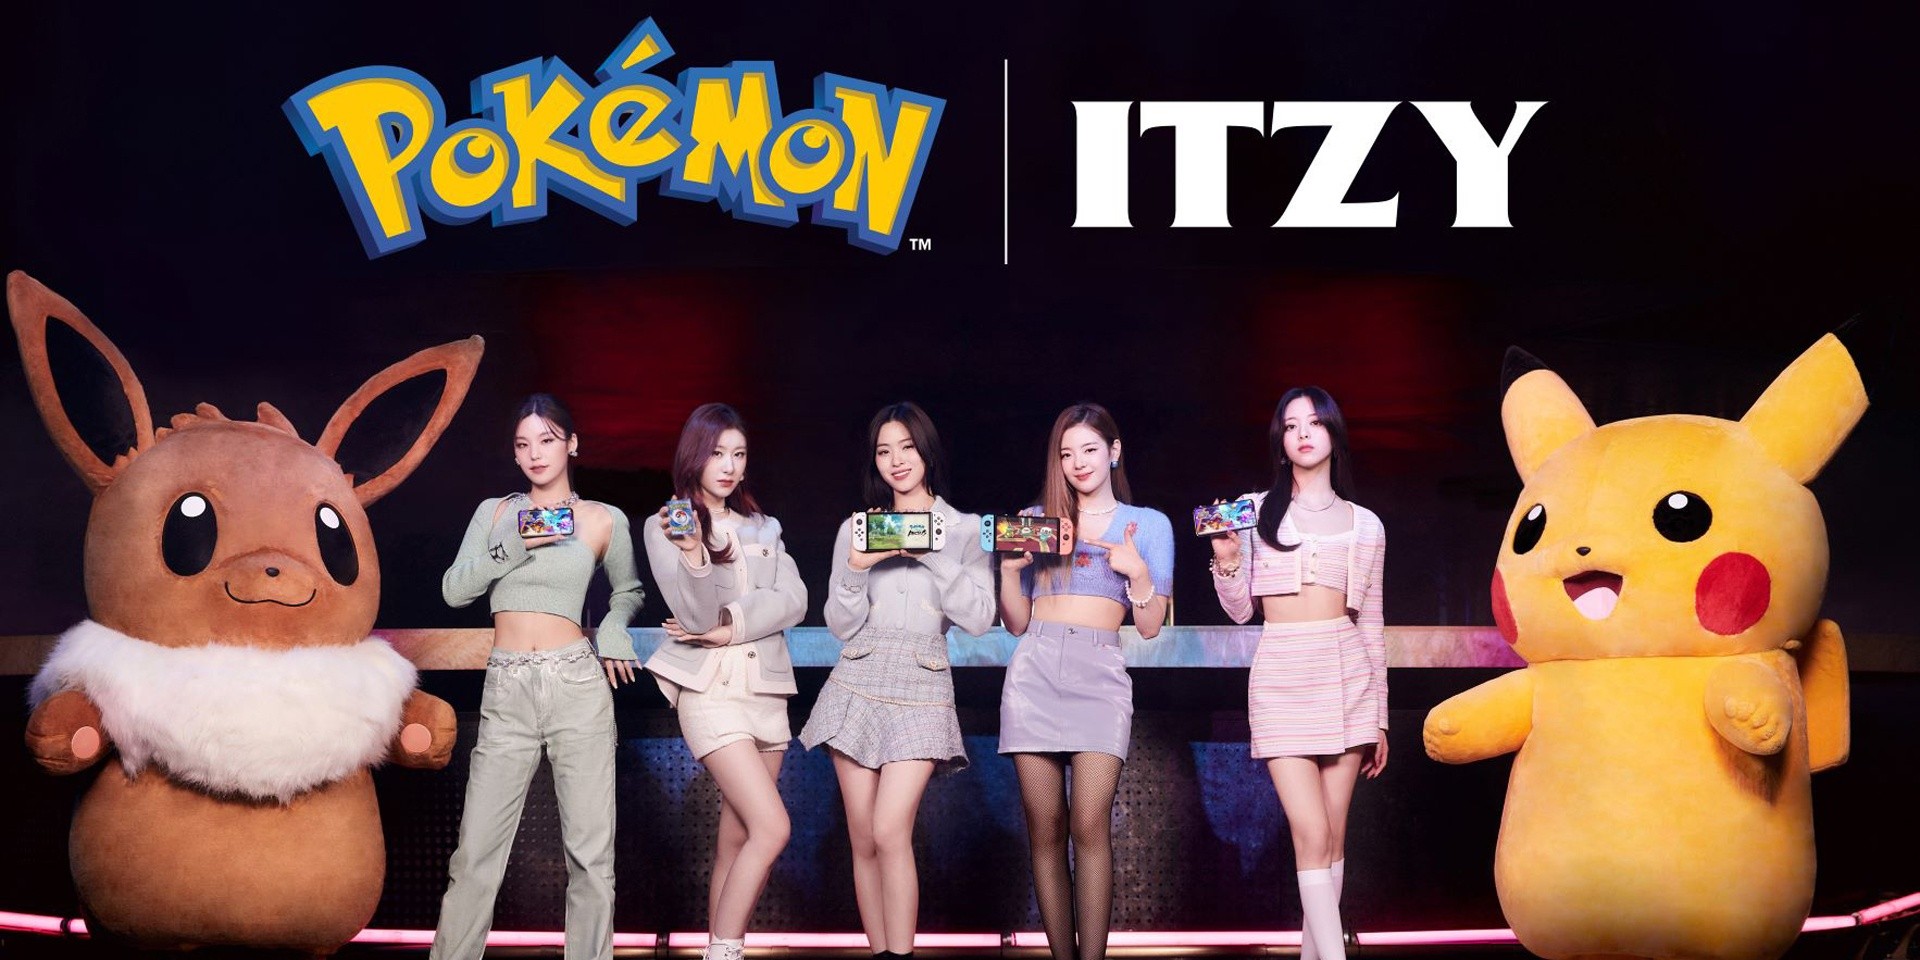 ITZY and Pokémon announce collaboration for video series – watch